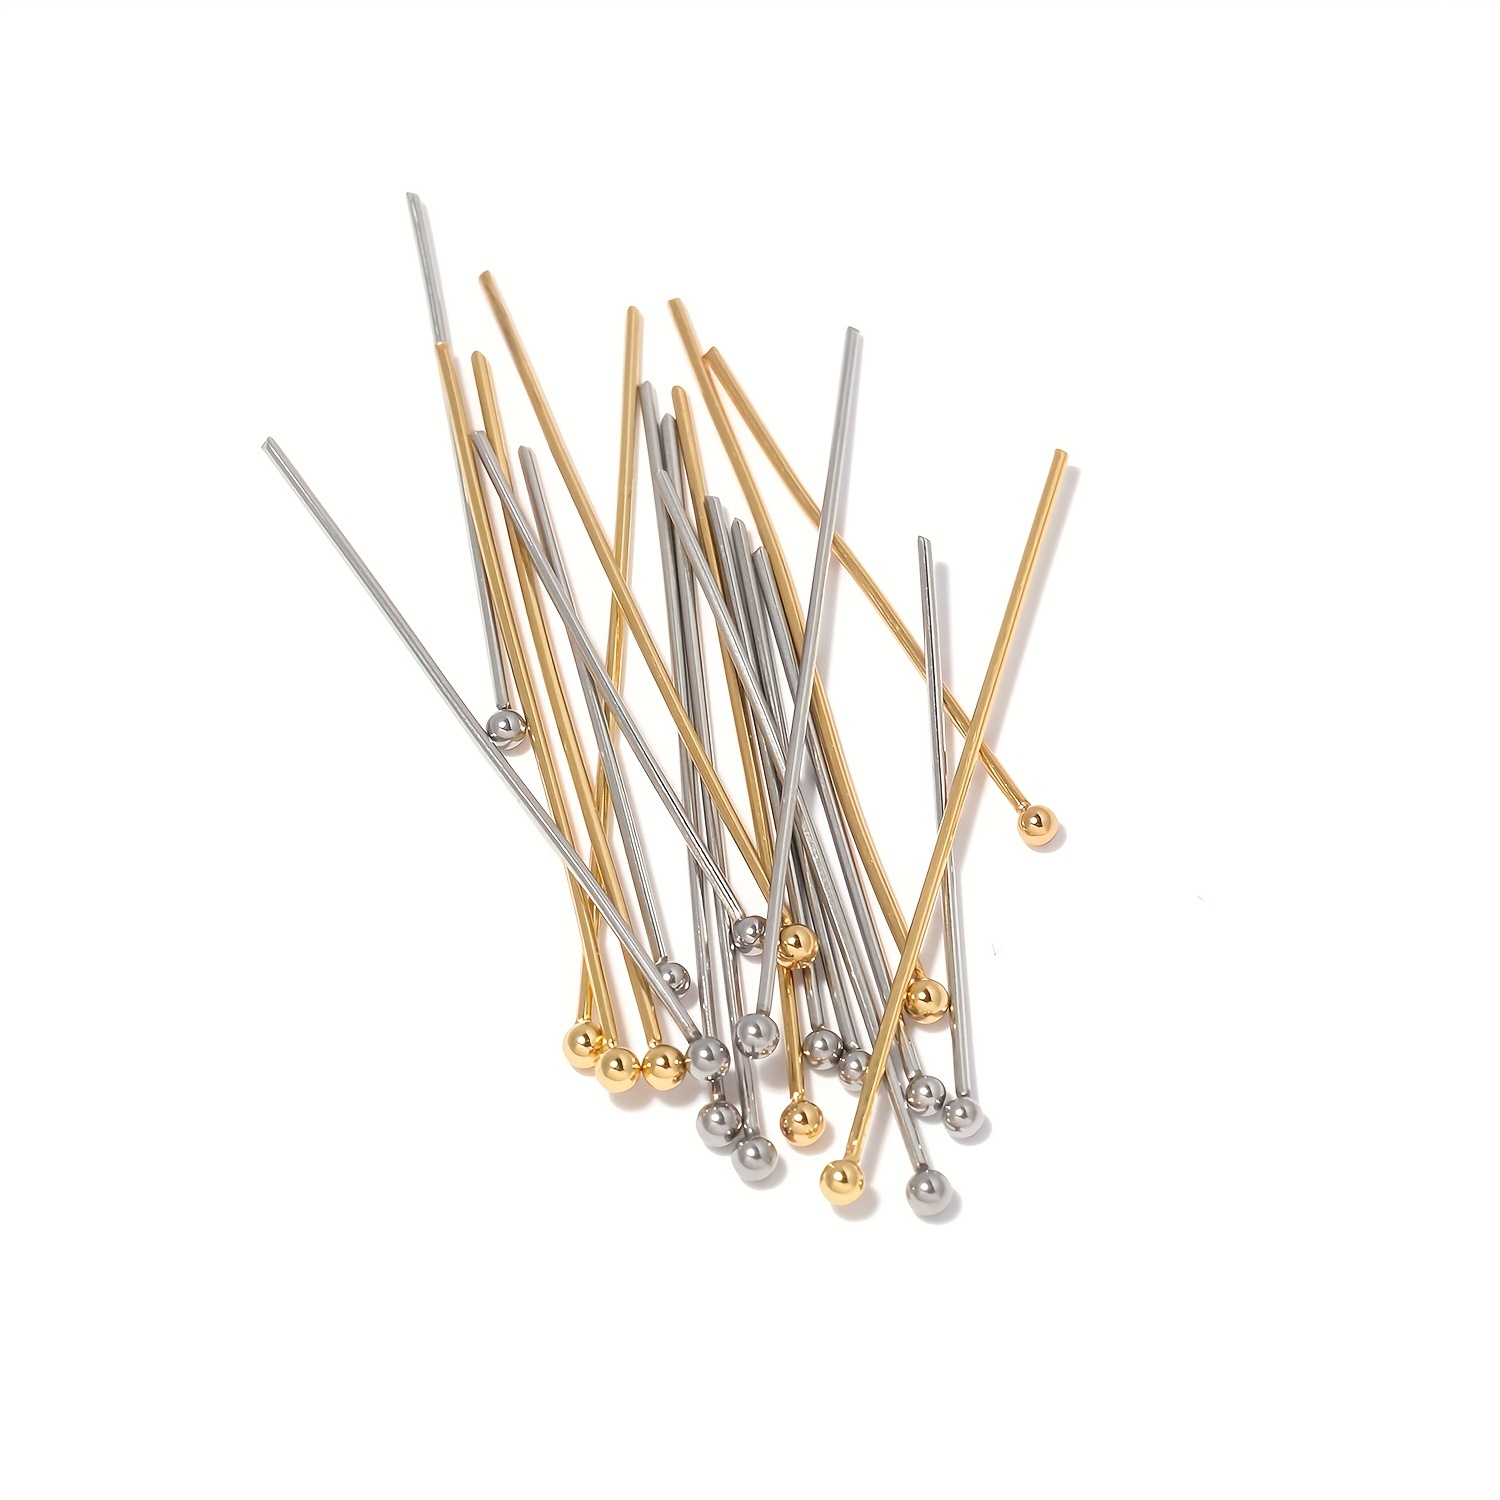 Crafto Golden Kit of Head pins, Eyepins, Jump Rings, Ear Hooks For  Jewellery Making Clasps (Pack of 100) Each - Golden Kit of Head pins,  Eyepins, Jump Rings, Ear Hooks For Jewellery